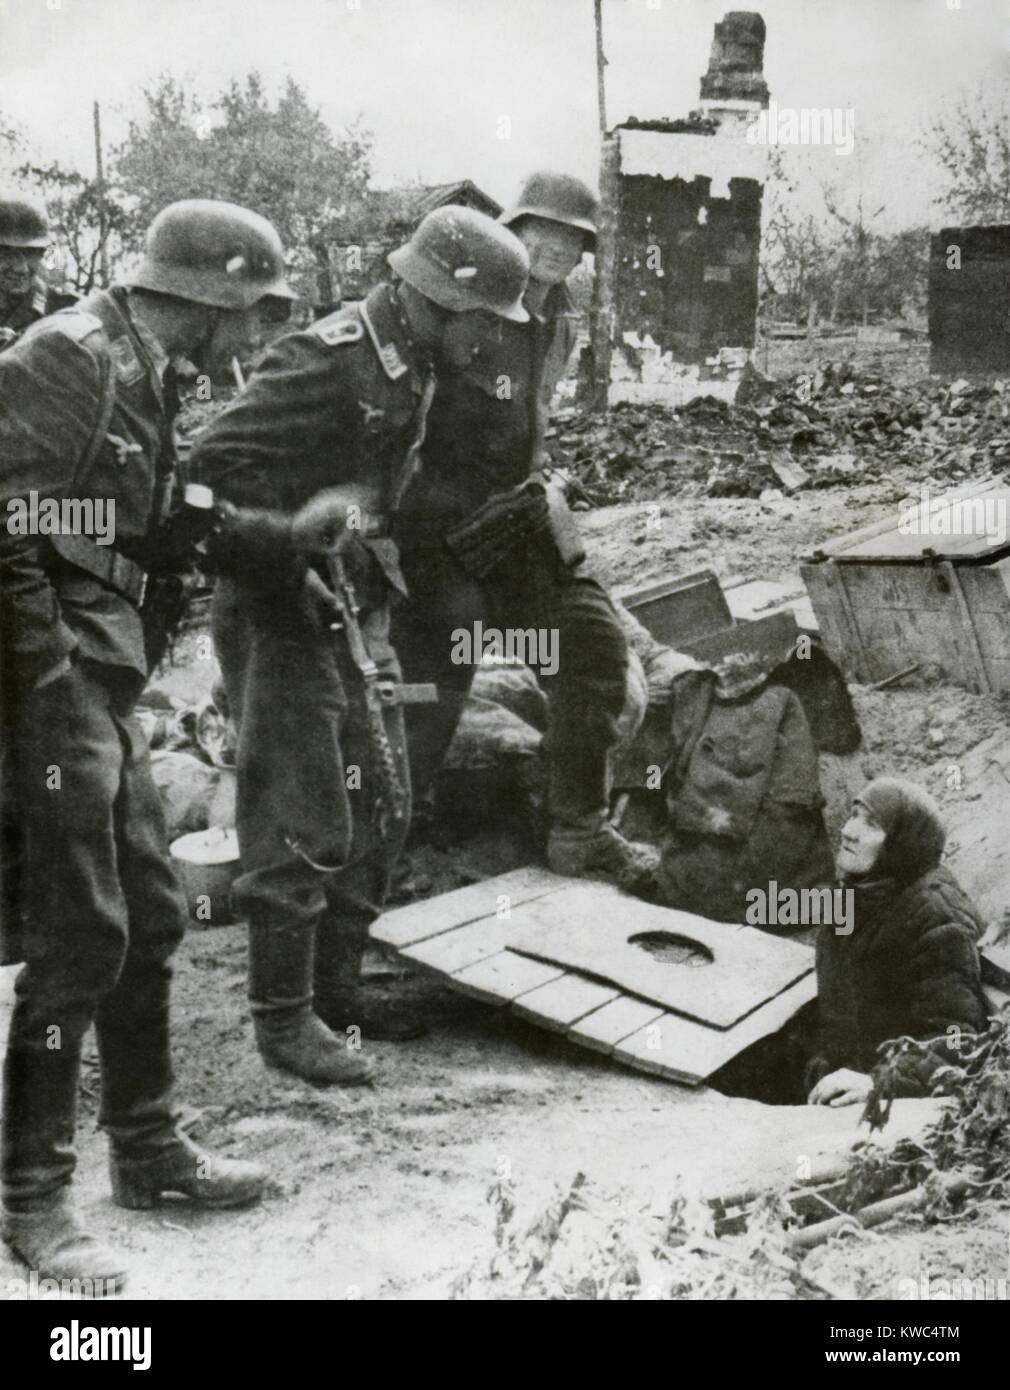 In Stalingrad, German soldiers extract an old Russian elderly woman from her hiding place. Late summer, 1942. World War 2 (BSLOC 2015 13 108) Stock Photo